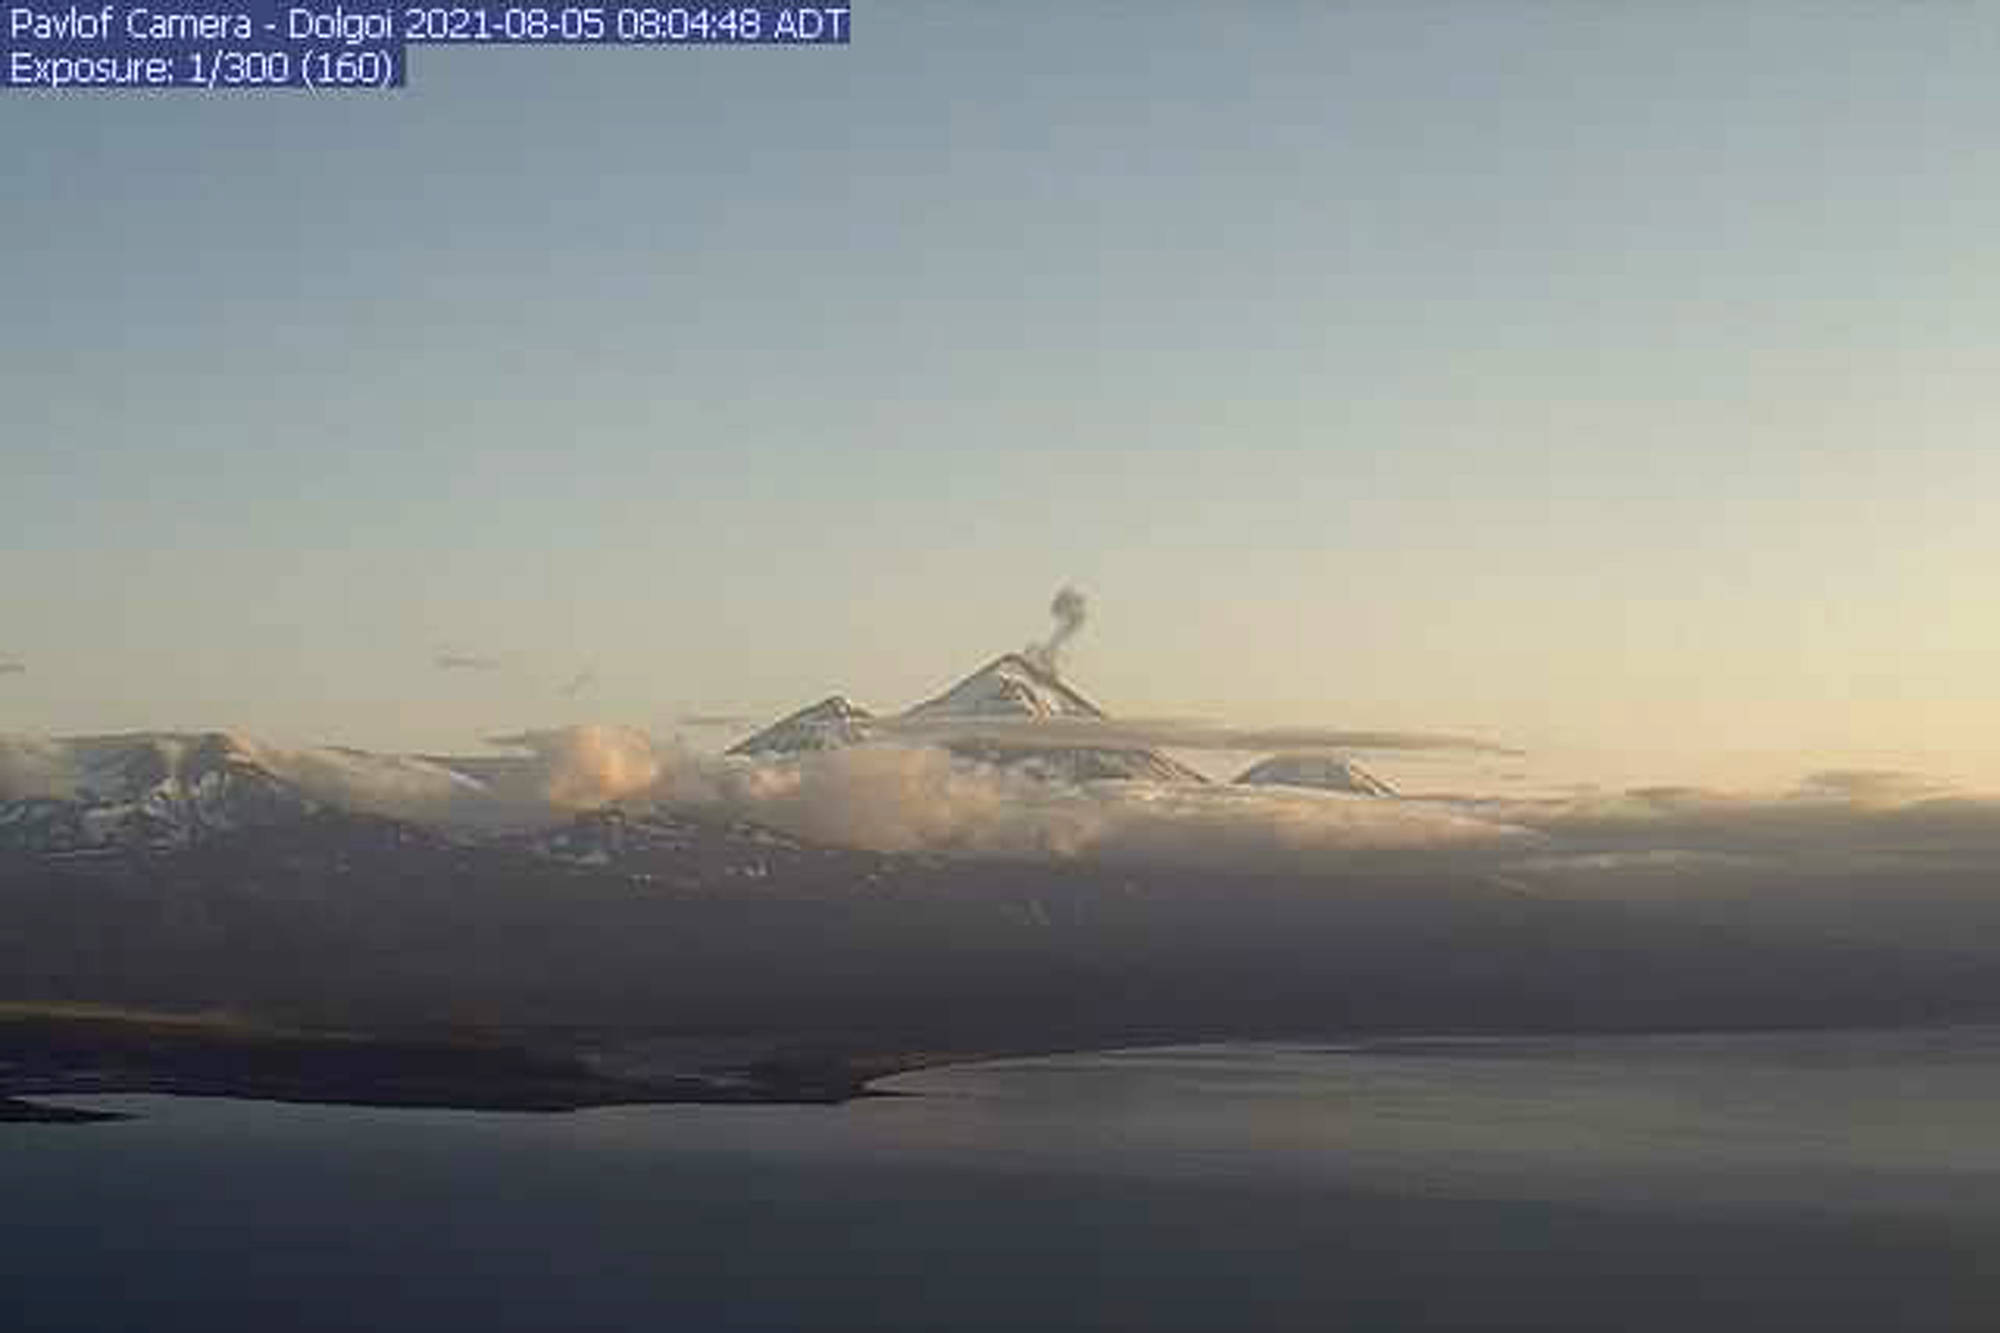 In this webcam image provided by the Alaska Volcano Observatory, is the Pavlof Volcano in a state of eruption with episodic low-level ash emissions on Thursday, Aug. 5, 2021. Three remote Alaska volcanos are each in a state of eruption, one producing lava and the other two blowing steam and ash. So far, no small communities near any of the three have been impacted, Chris Waythomas, a geologist with the Alaska Volcano Observatory, said Thursday. (Alaska Volcano Observatory via AP)